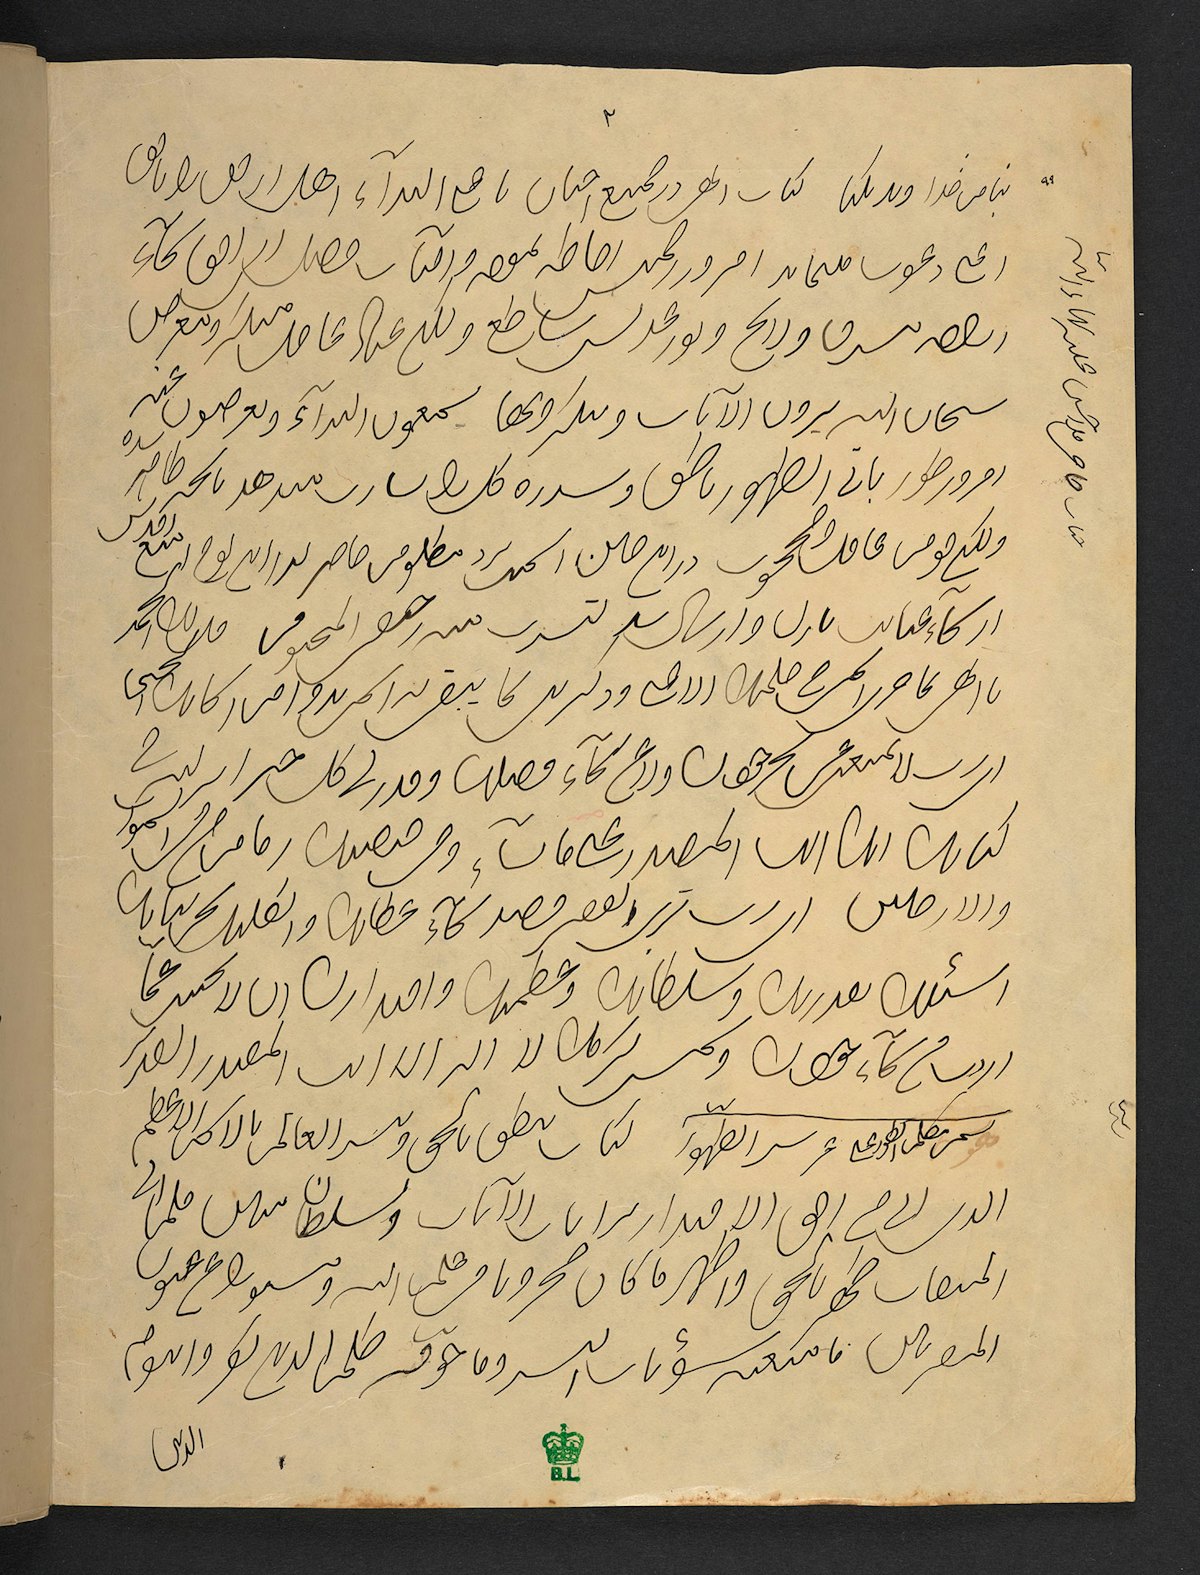 This manuscript, on display at the British Library, is an example of “Revelation Writing”, the form in which Baha’u’llah’s words were recorded at speed by His secretaries as they were revealed.